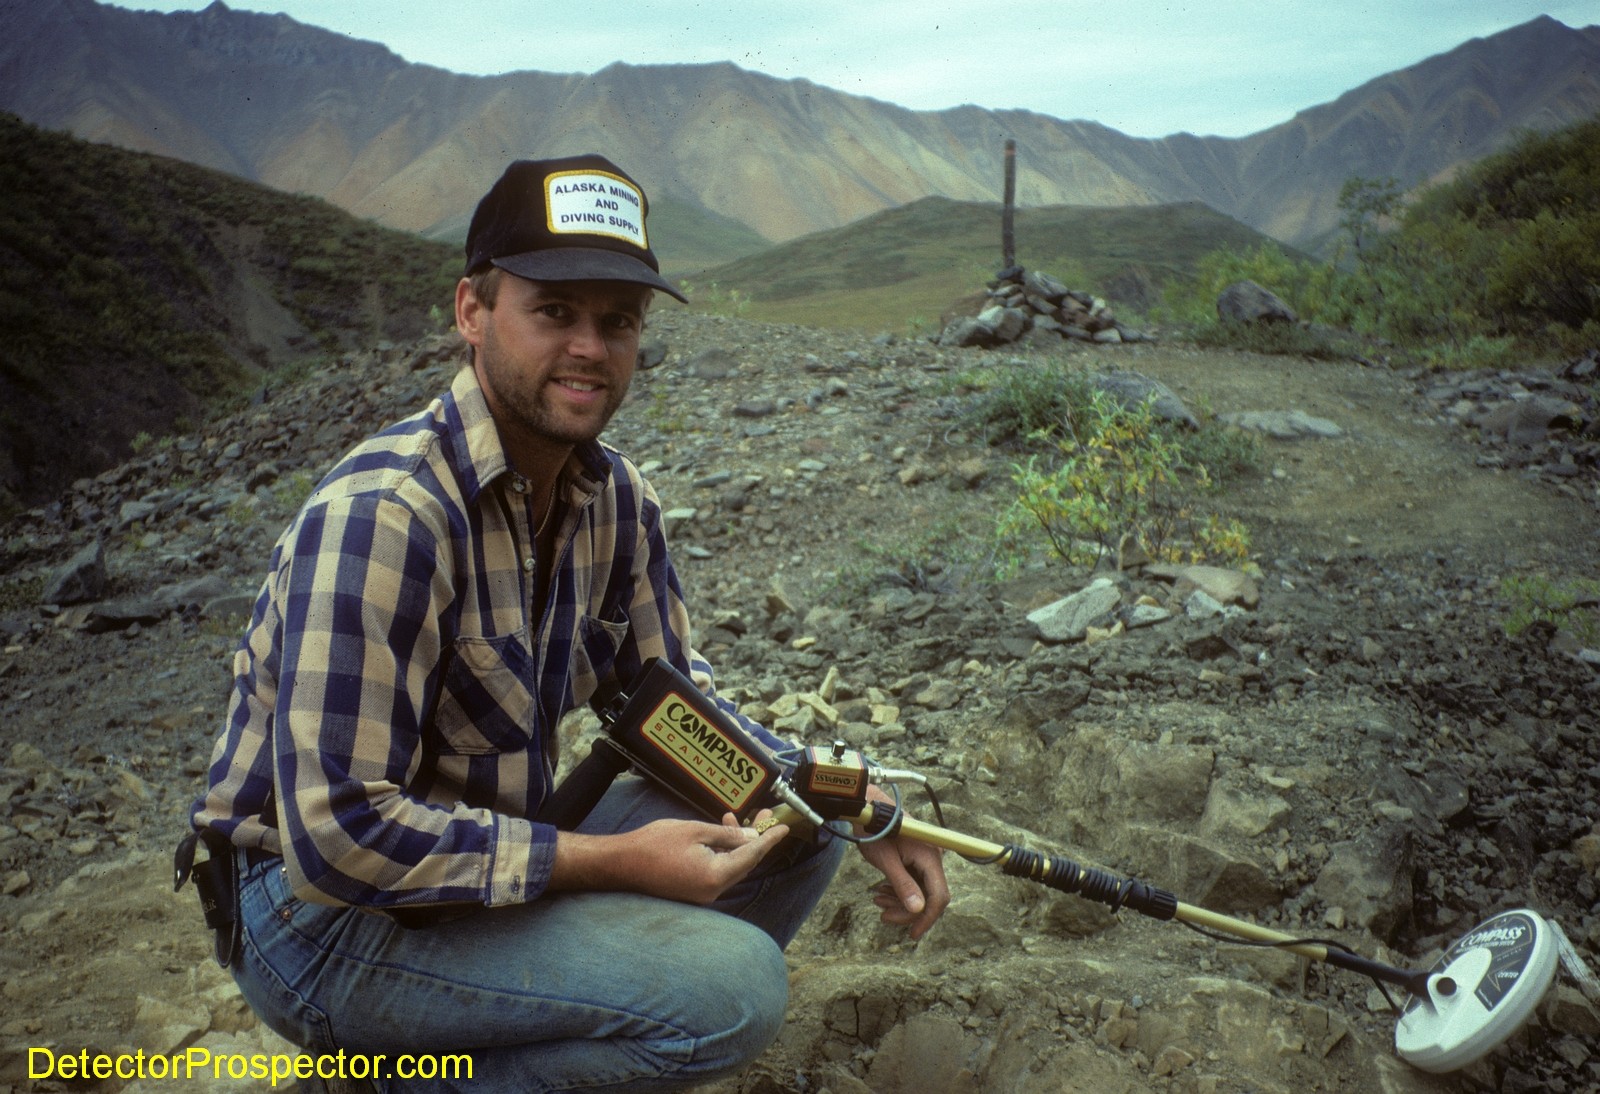 steve-with-6-dwt-gold-nugget-compass-scanner-pro.jpg